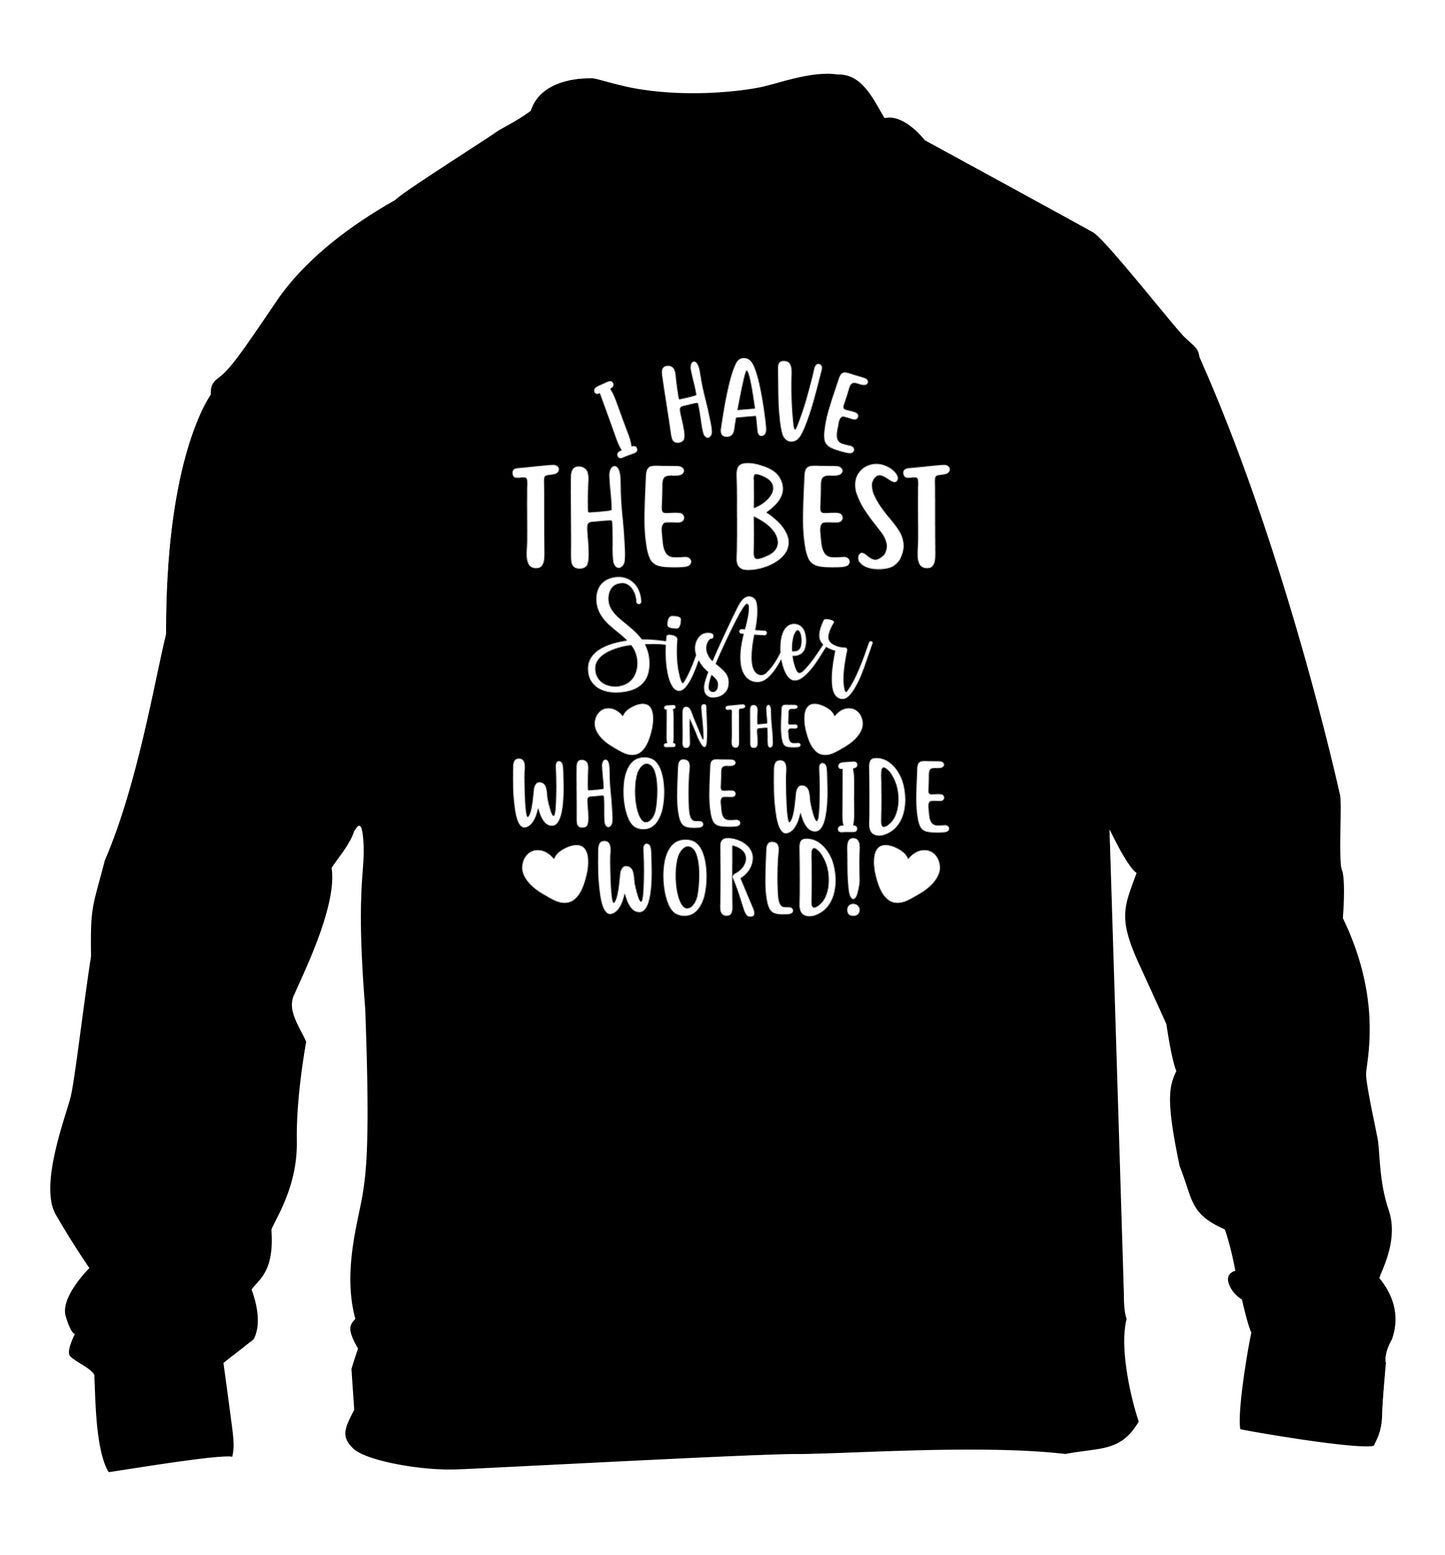 I have the best sister in the whole wide world! children's black sweater 12-13 Years